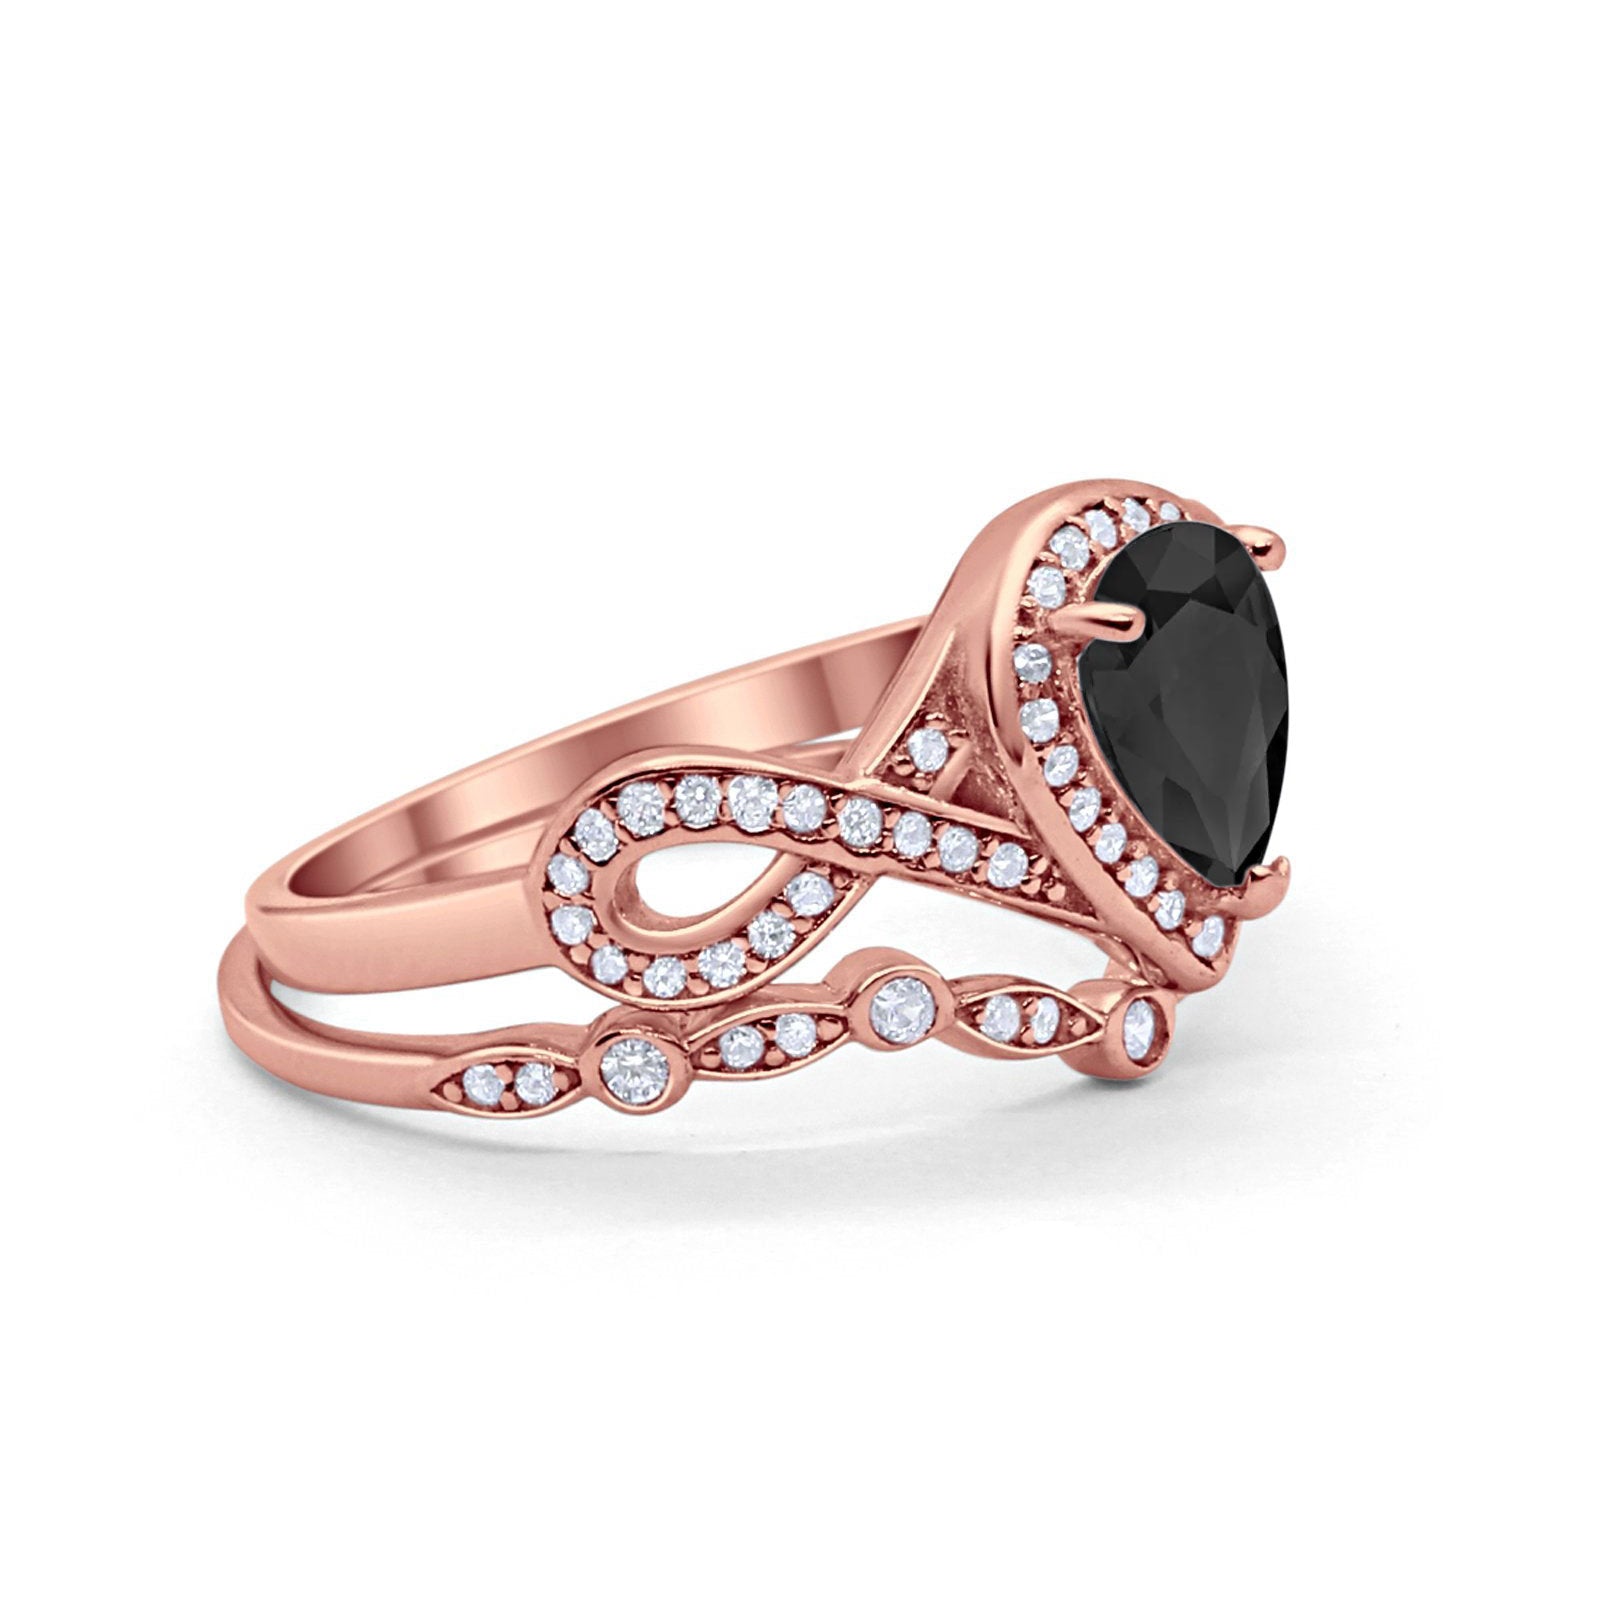 Teardrop Wedding Ring Piece Band Rose Tone, Simulated Black CZ 925 Sterling Silver